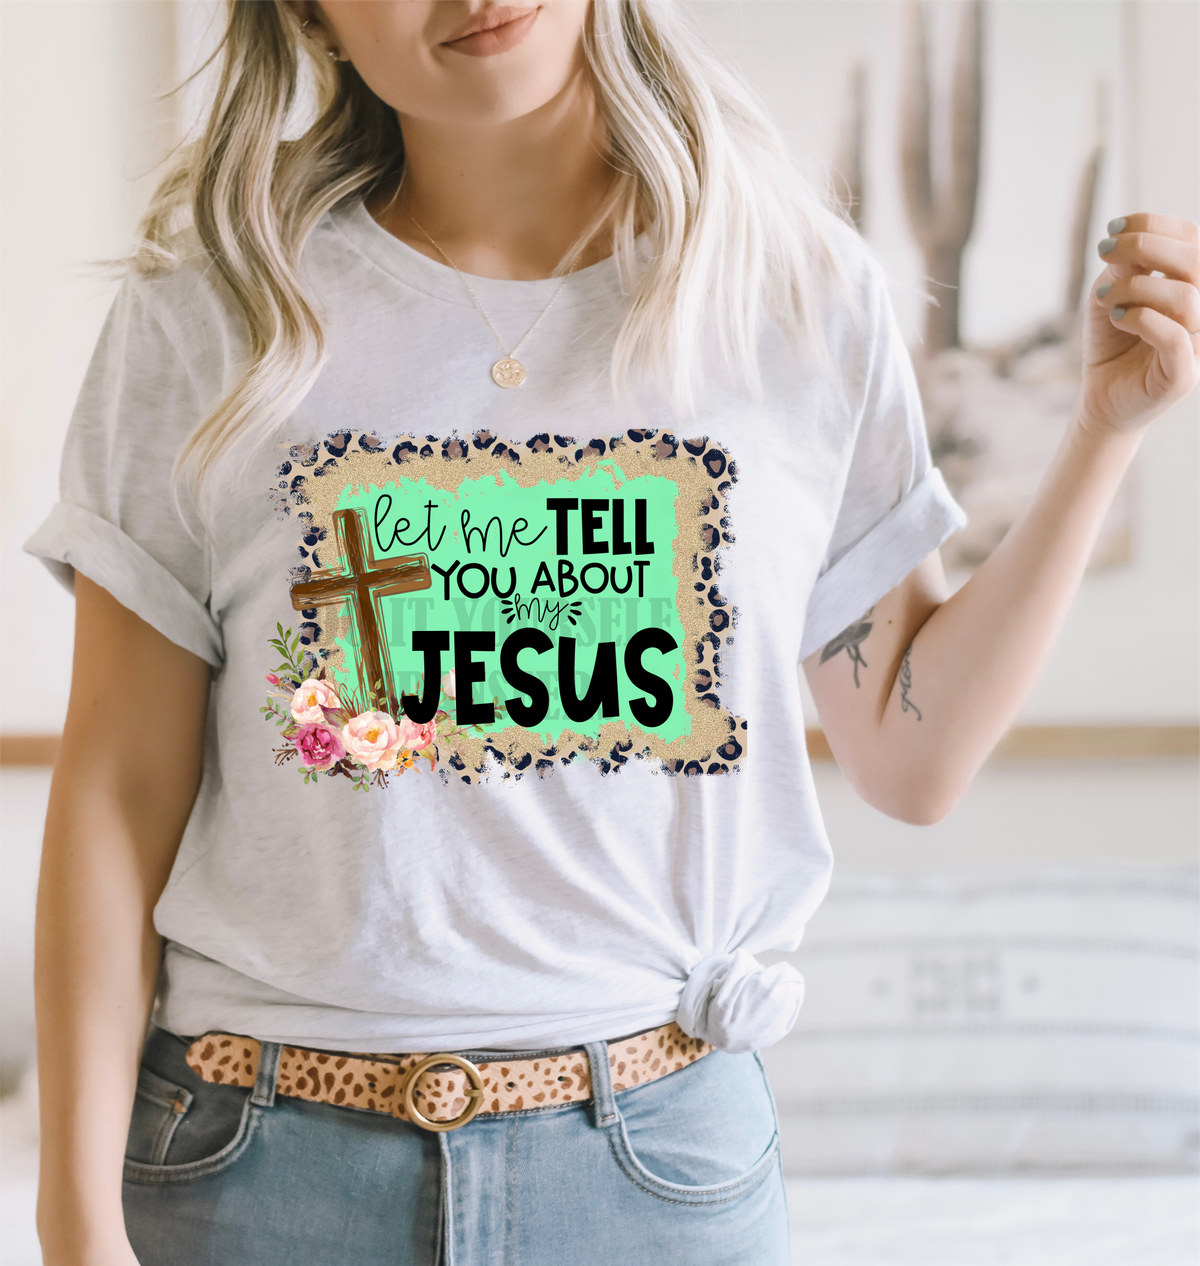 Let me tell you about my Jesus song cross  Adult size .2 DTF TRANSFERPRINT TO ORDER